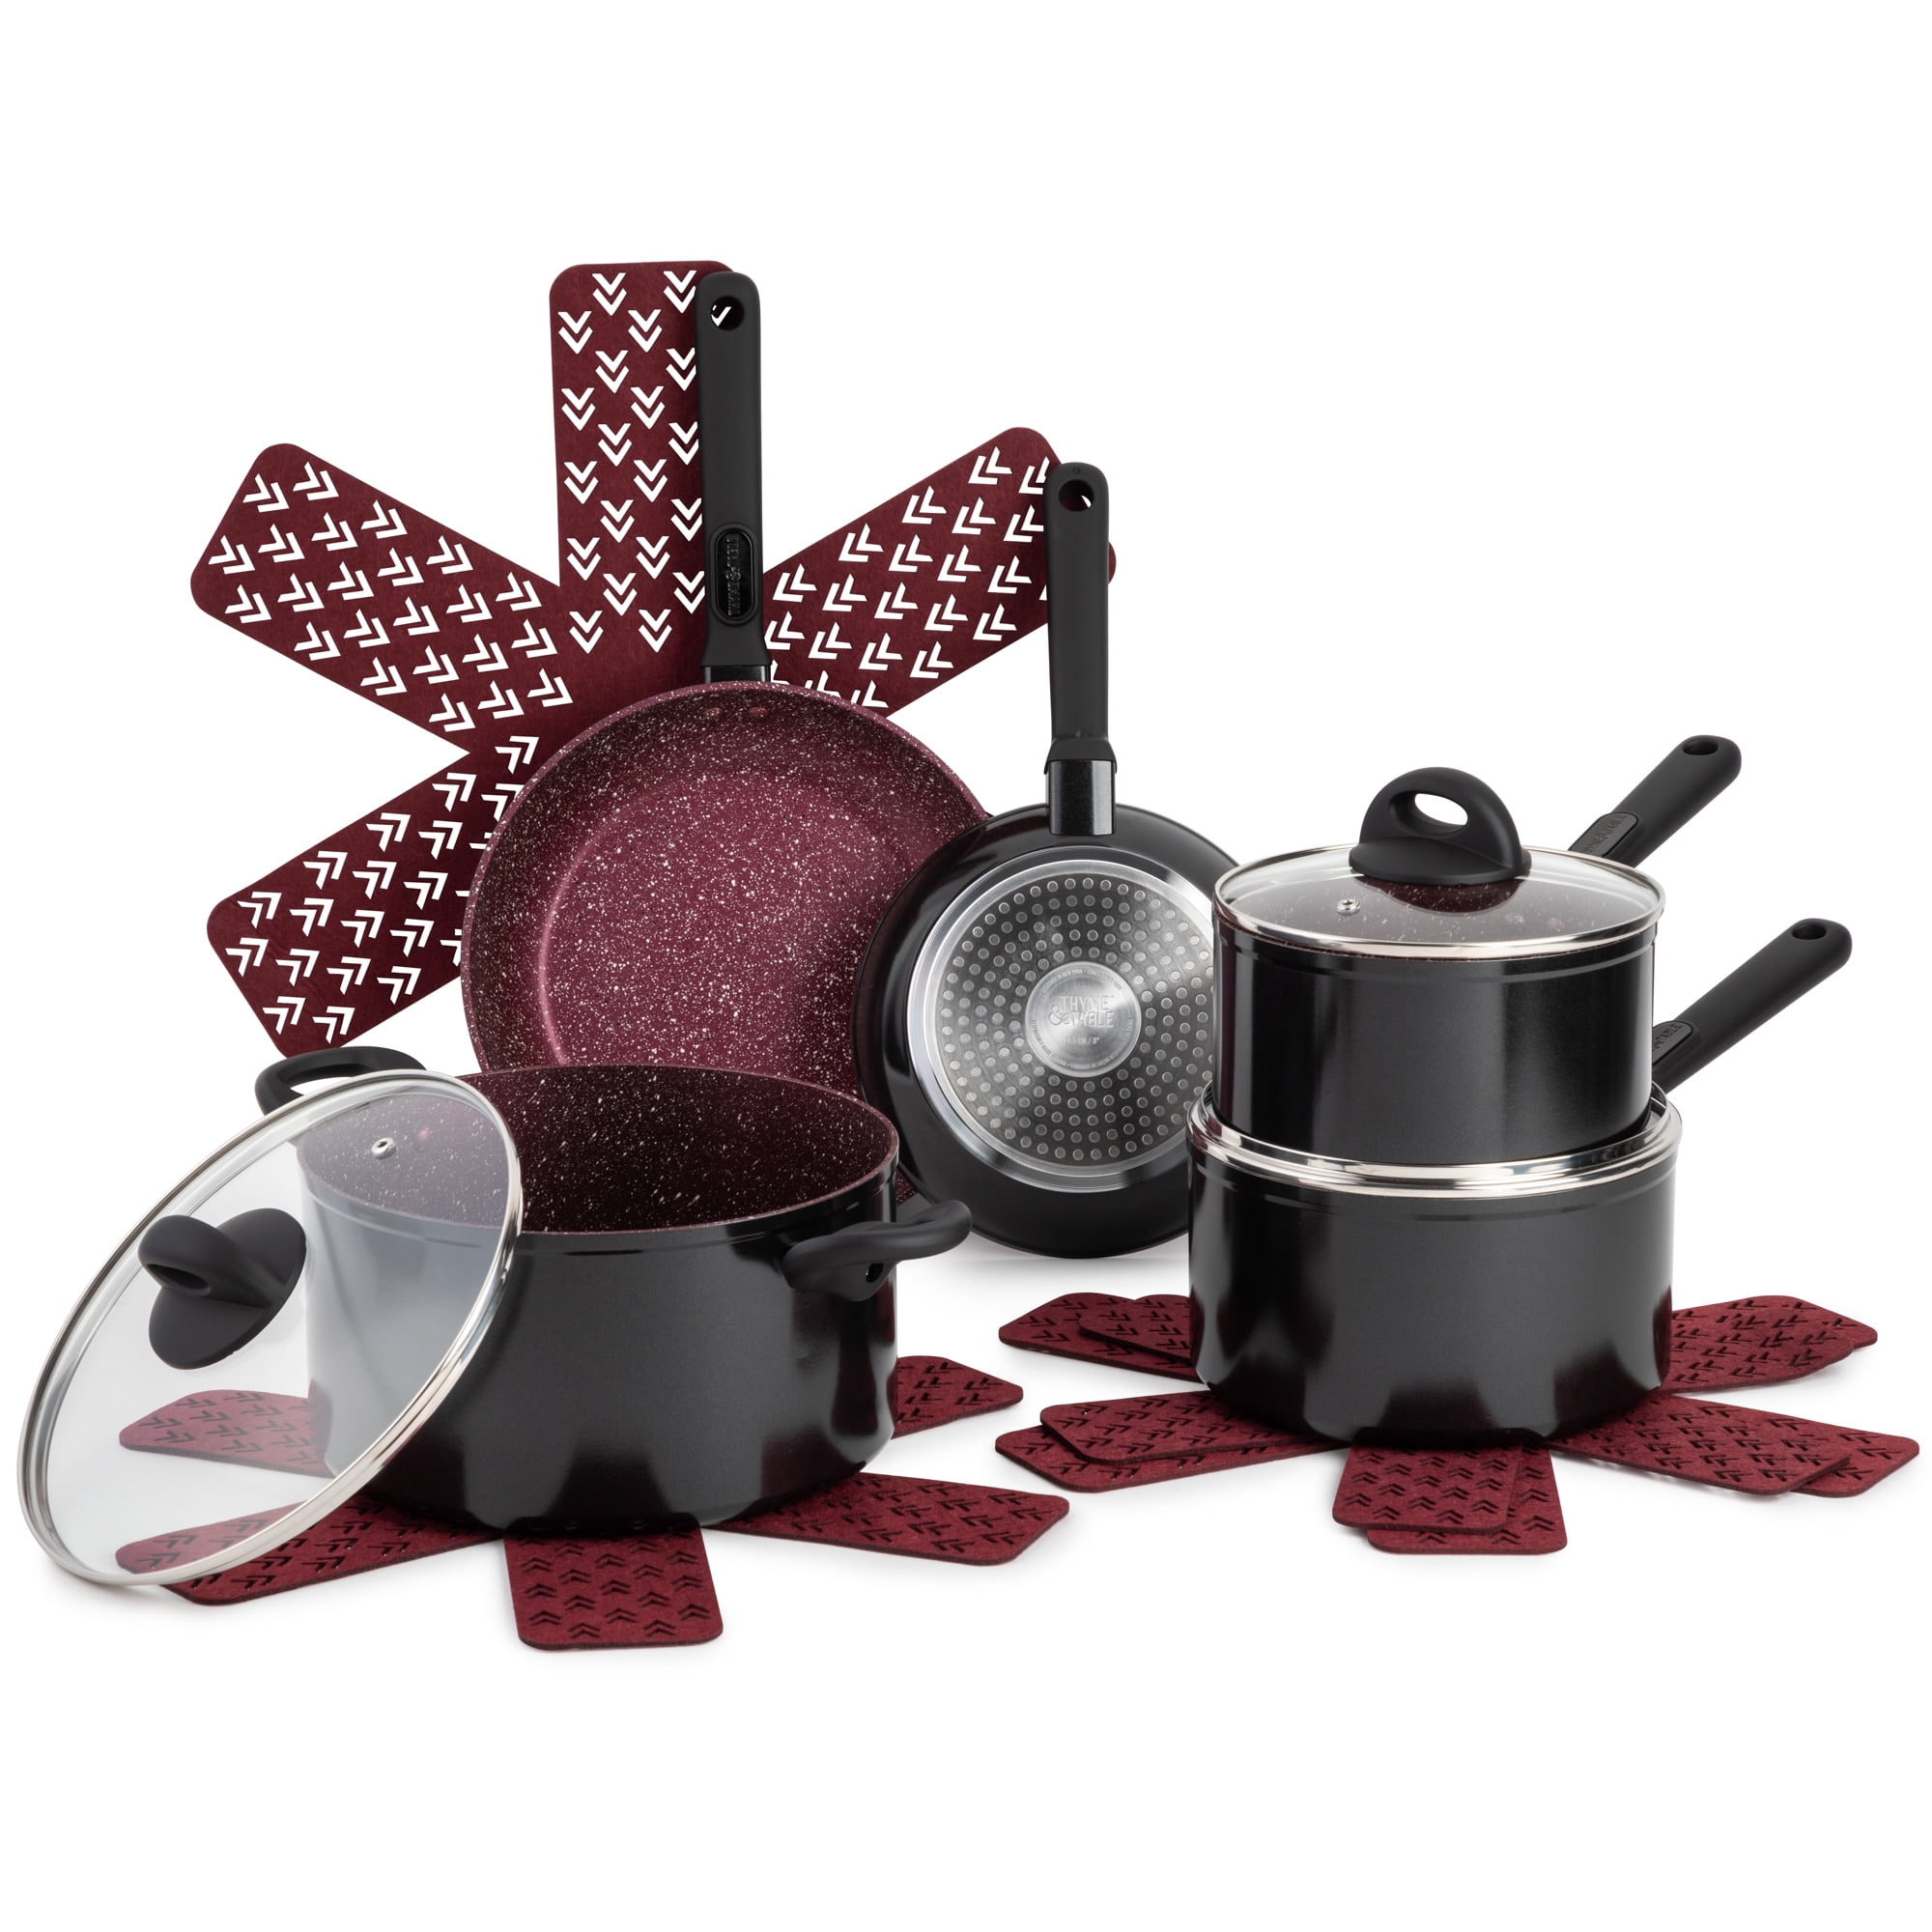 This Non-Toxic Cookware Set From  With Over 34,000 5-Star reviews Now  Comes in 12 Color Options & It's on Sale